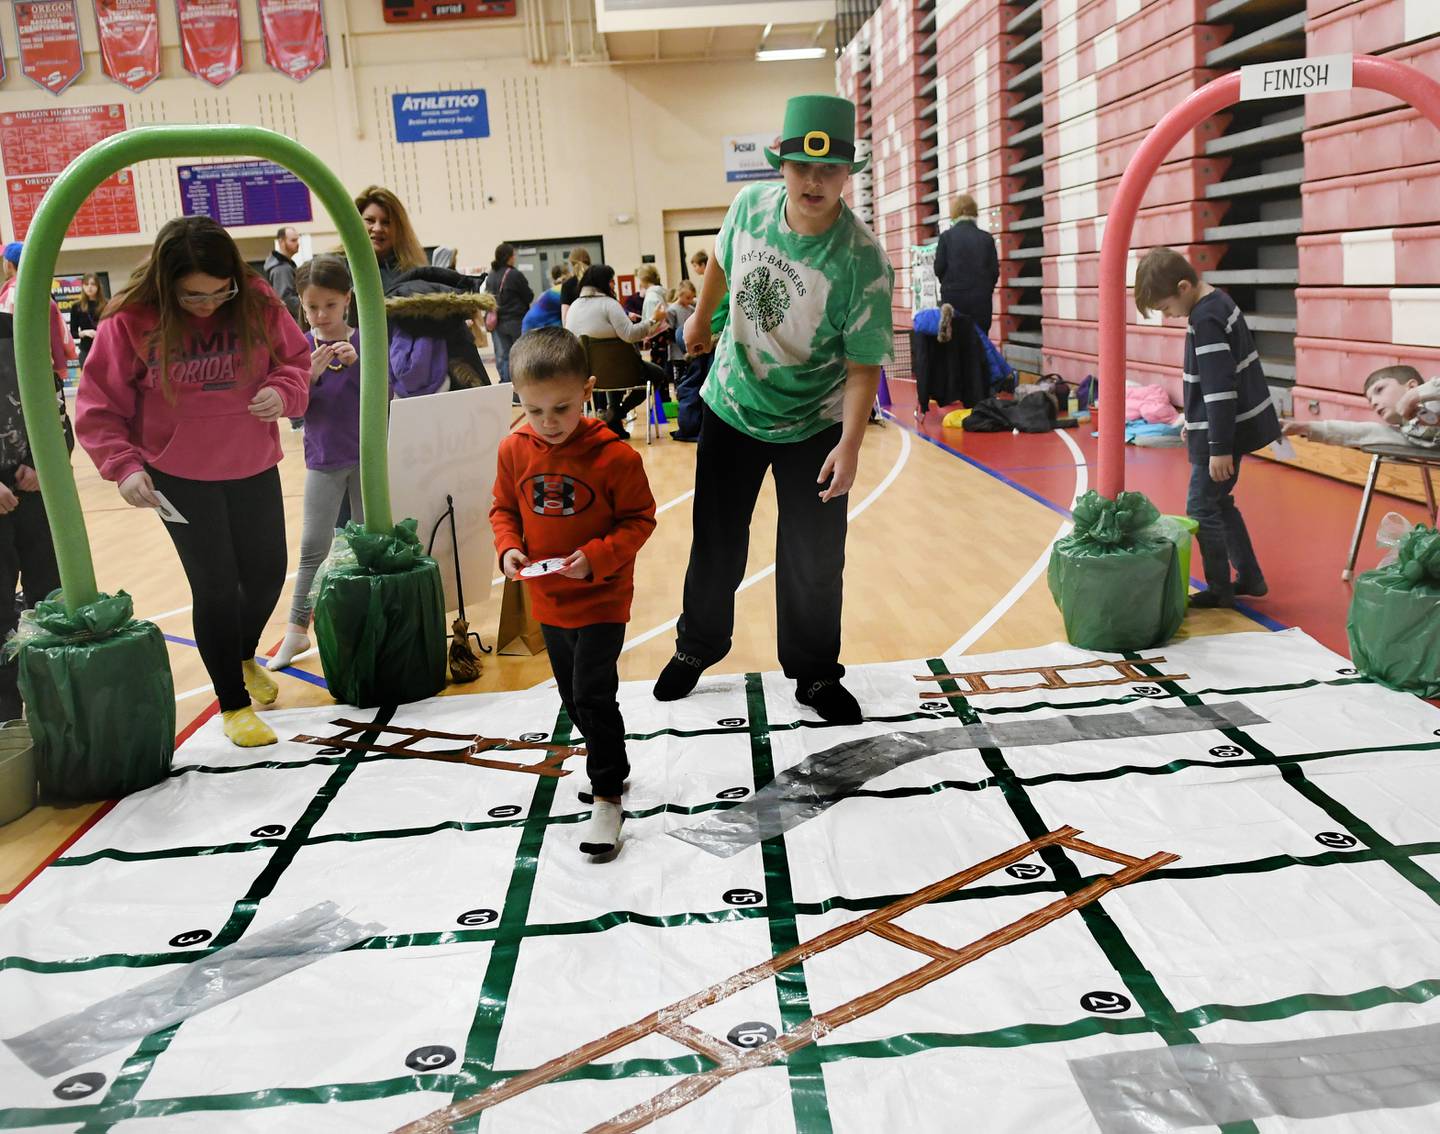 Andrew Hickman a member of the BY Badgers 4-H Club helps direct Isacc Blankenship, 4, of Stillman Valley through the club's 'Chutes and Ladders' game at the 4-H Penny Carnival on Saturday, March 18.